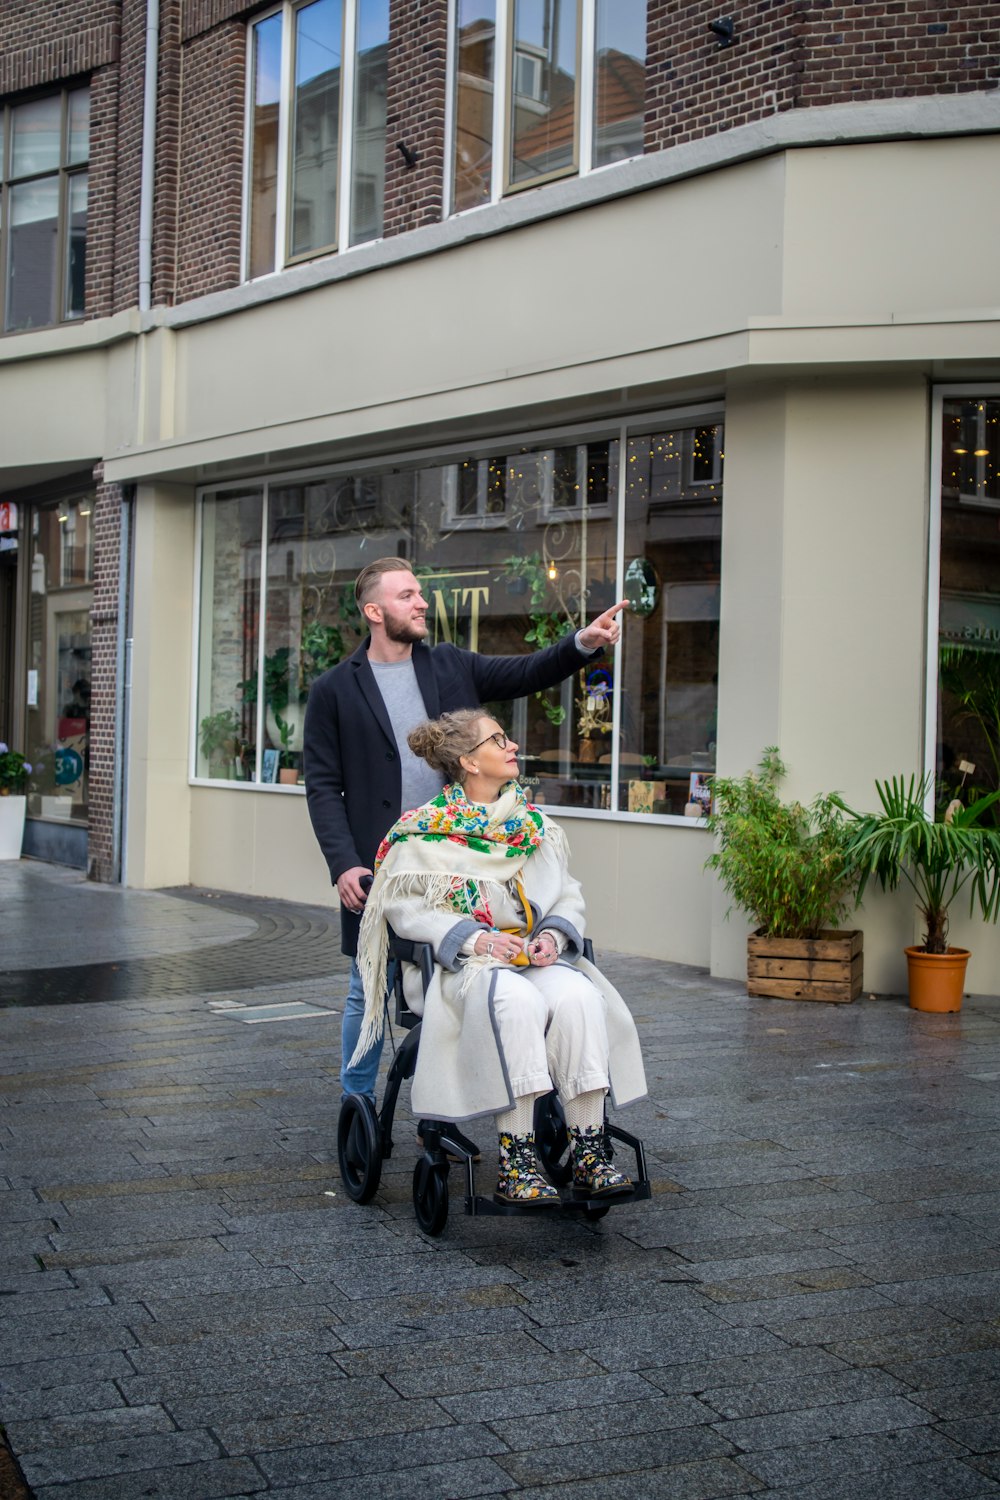 a man standing next to a woman in a wheel chair